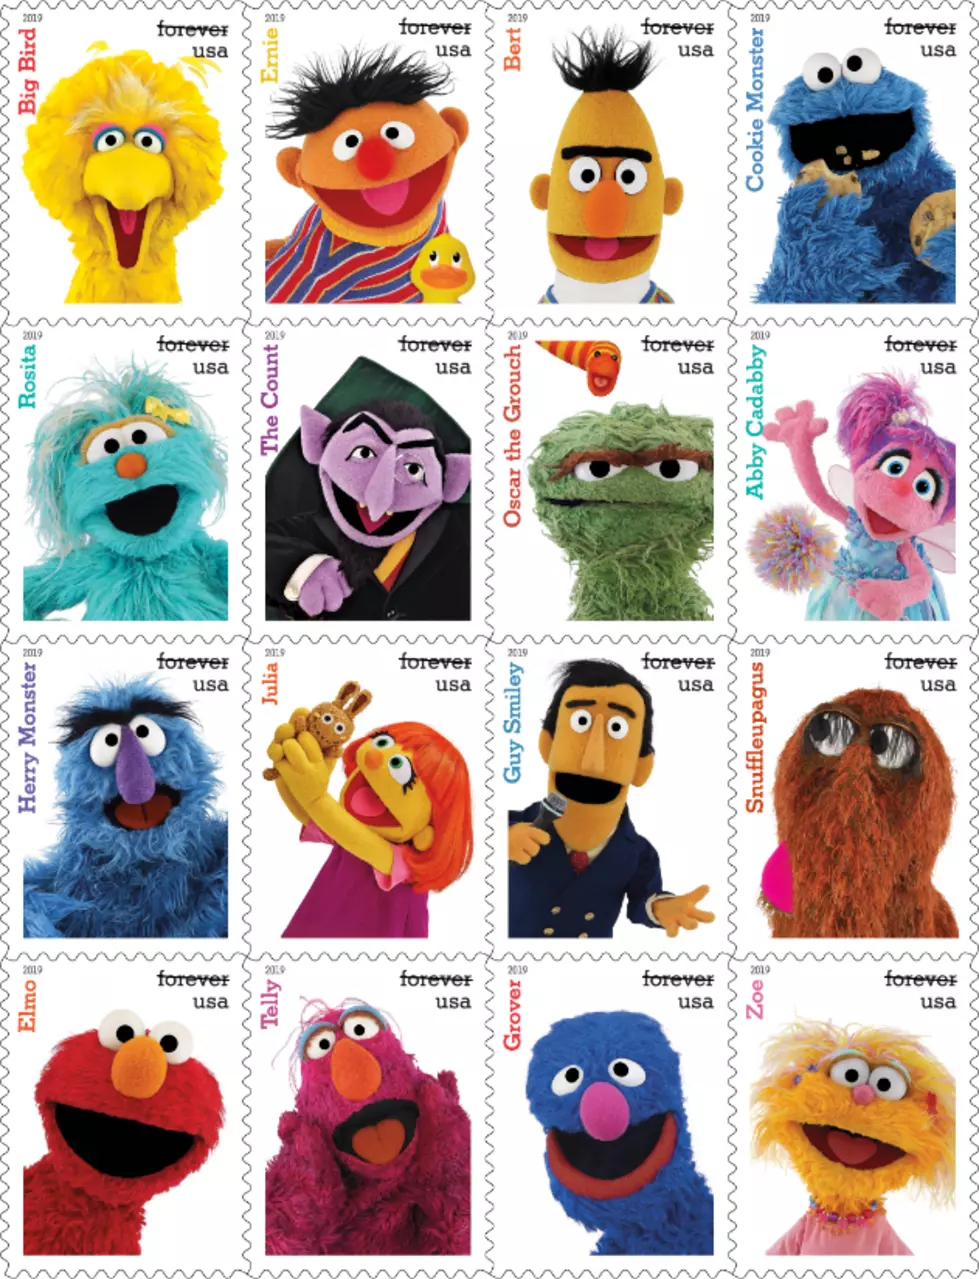 Sesame Street One of Three New Stamp Sets Released This Year